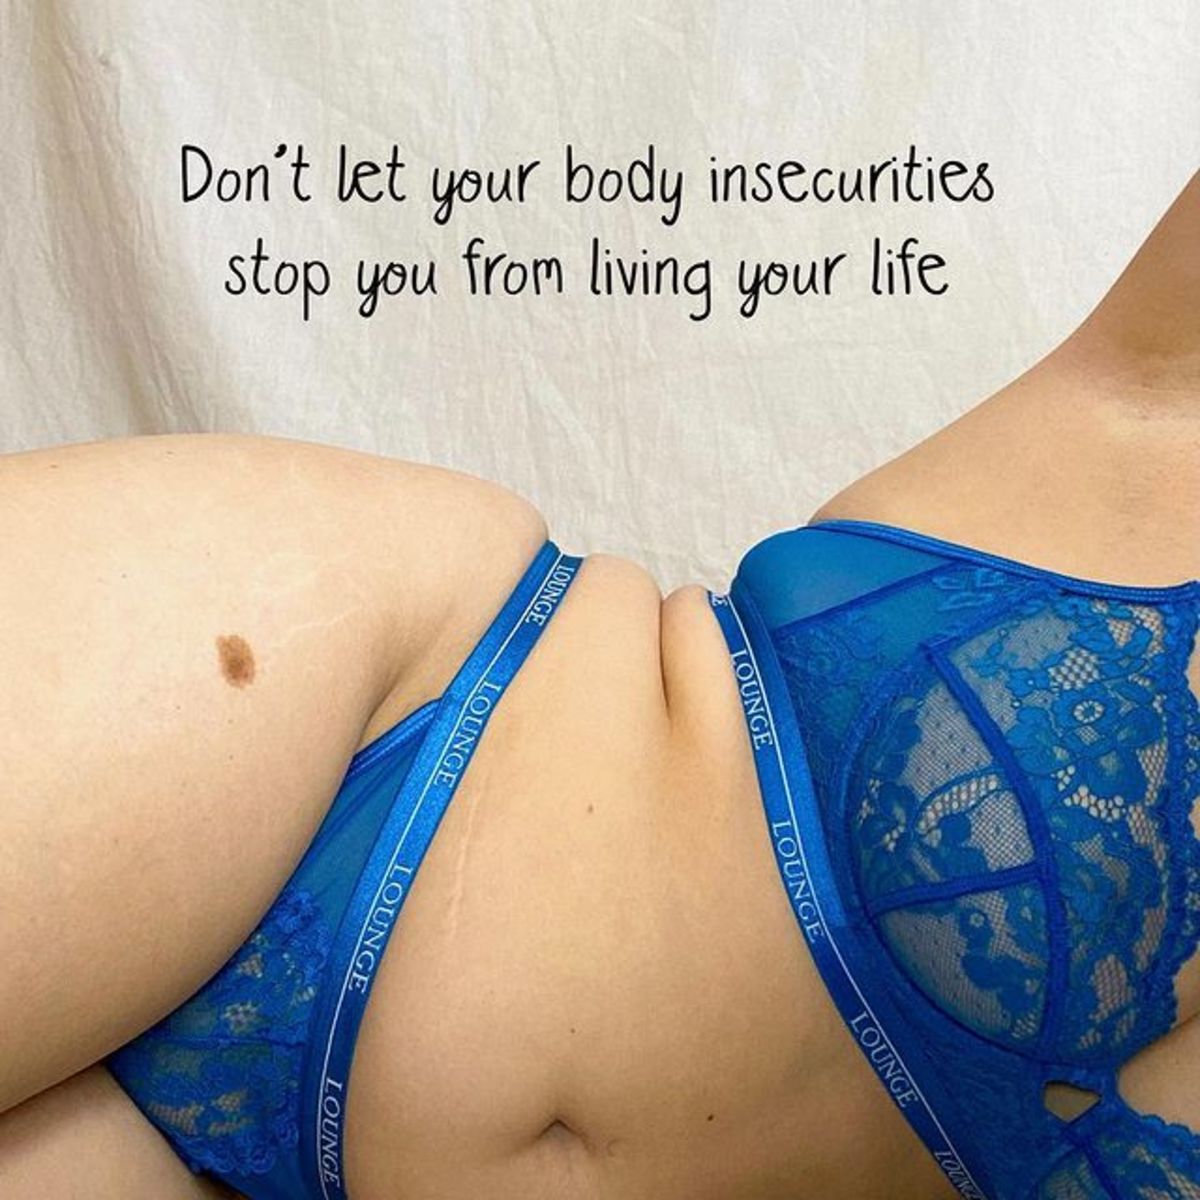 How to Deal with Body Dismorphia and Body Insecurities